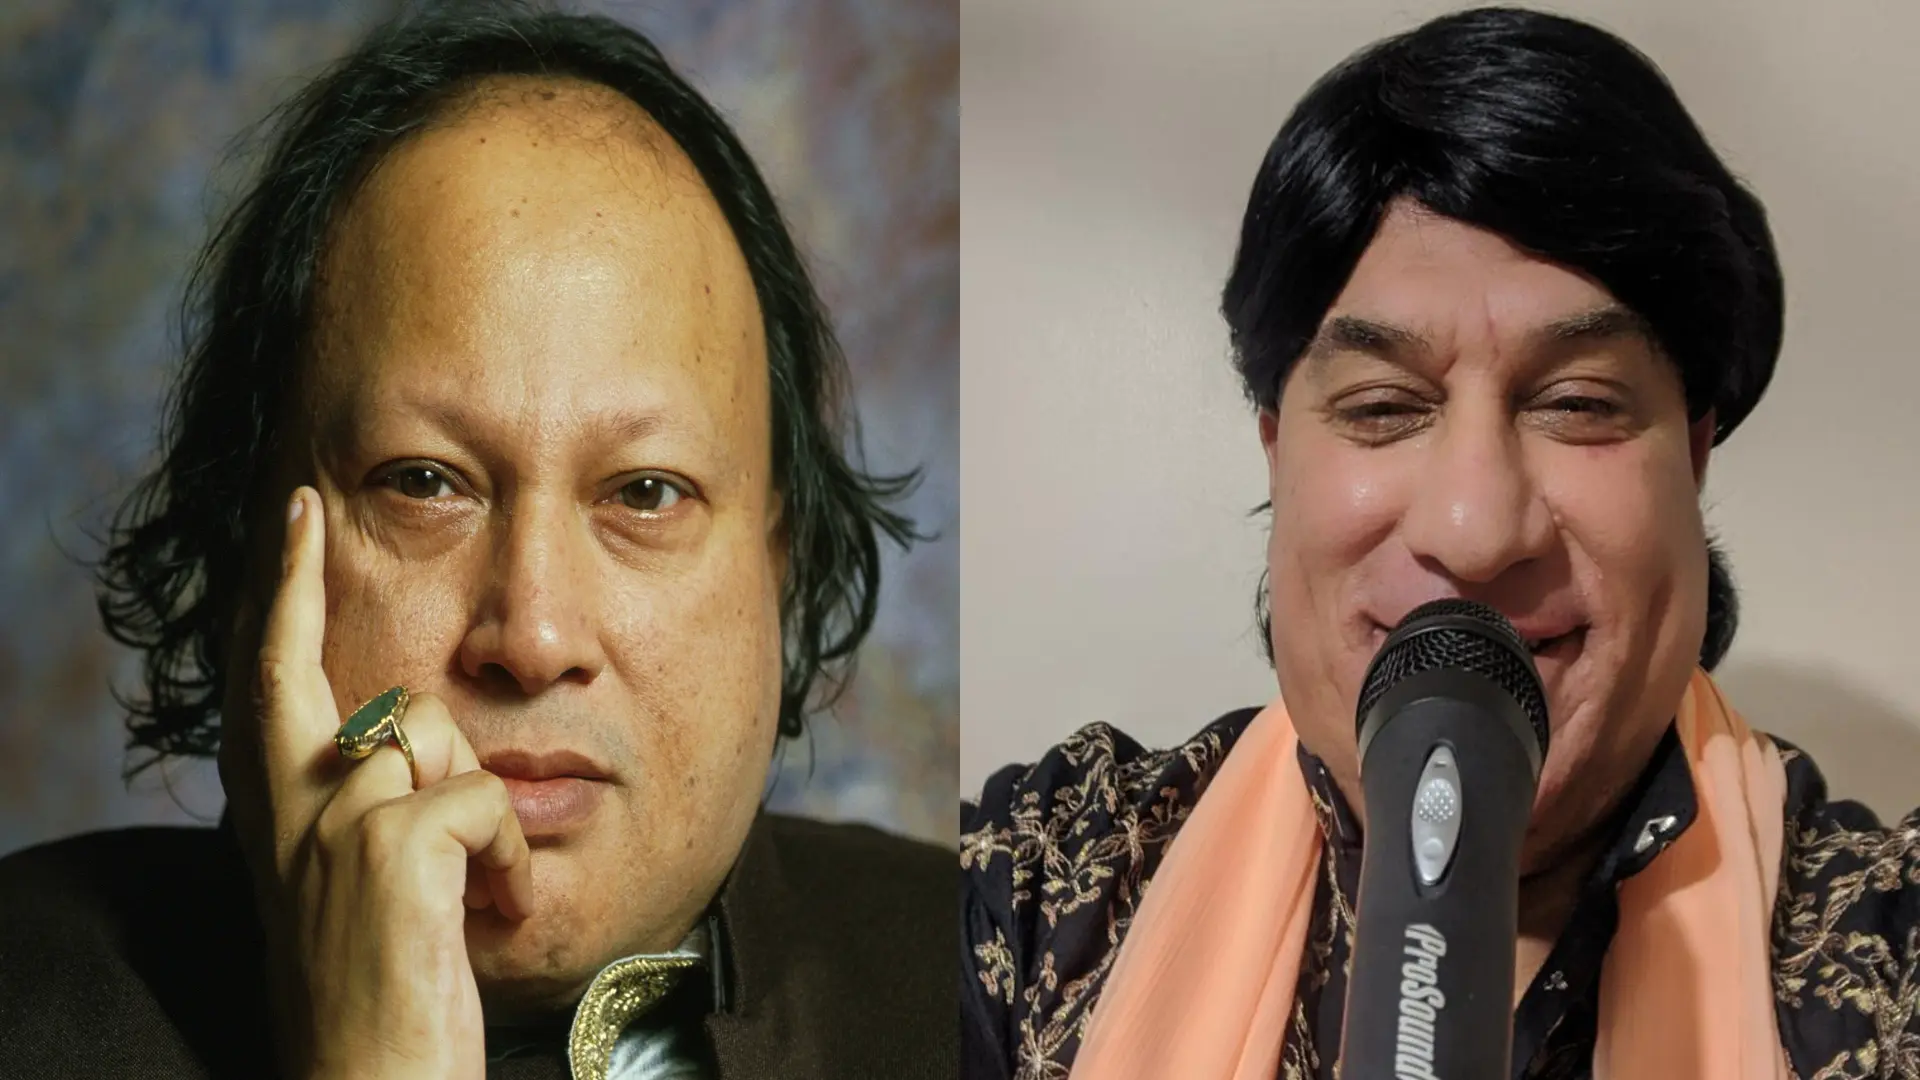 Chahat Fateh Ali Khan served with defamation notice for defaming NFAK